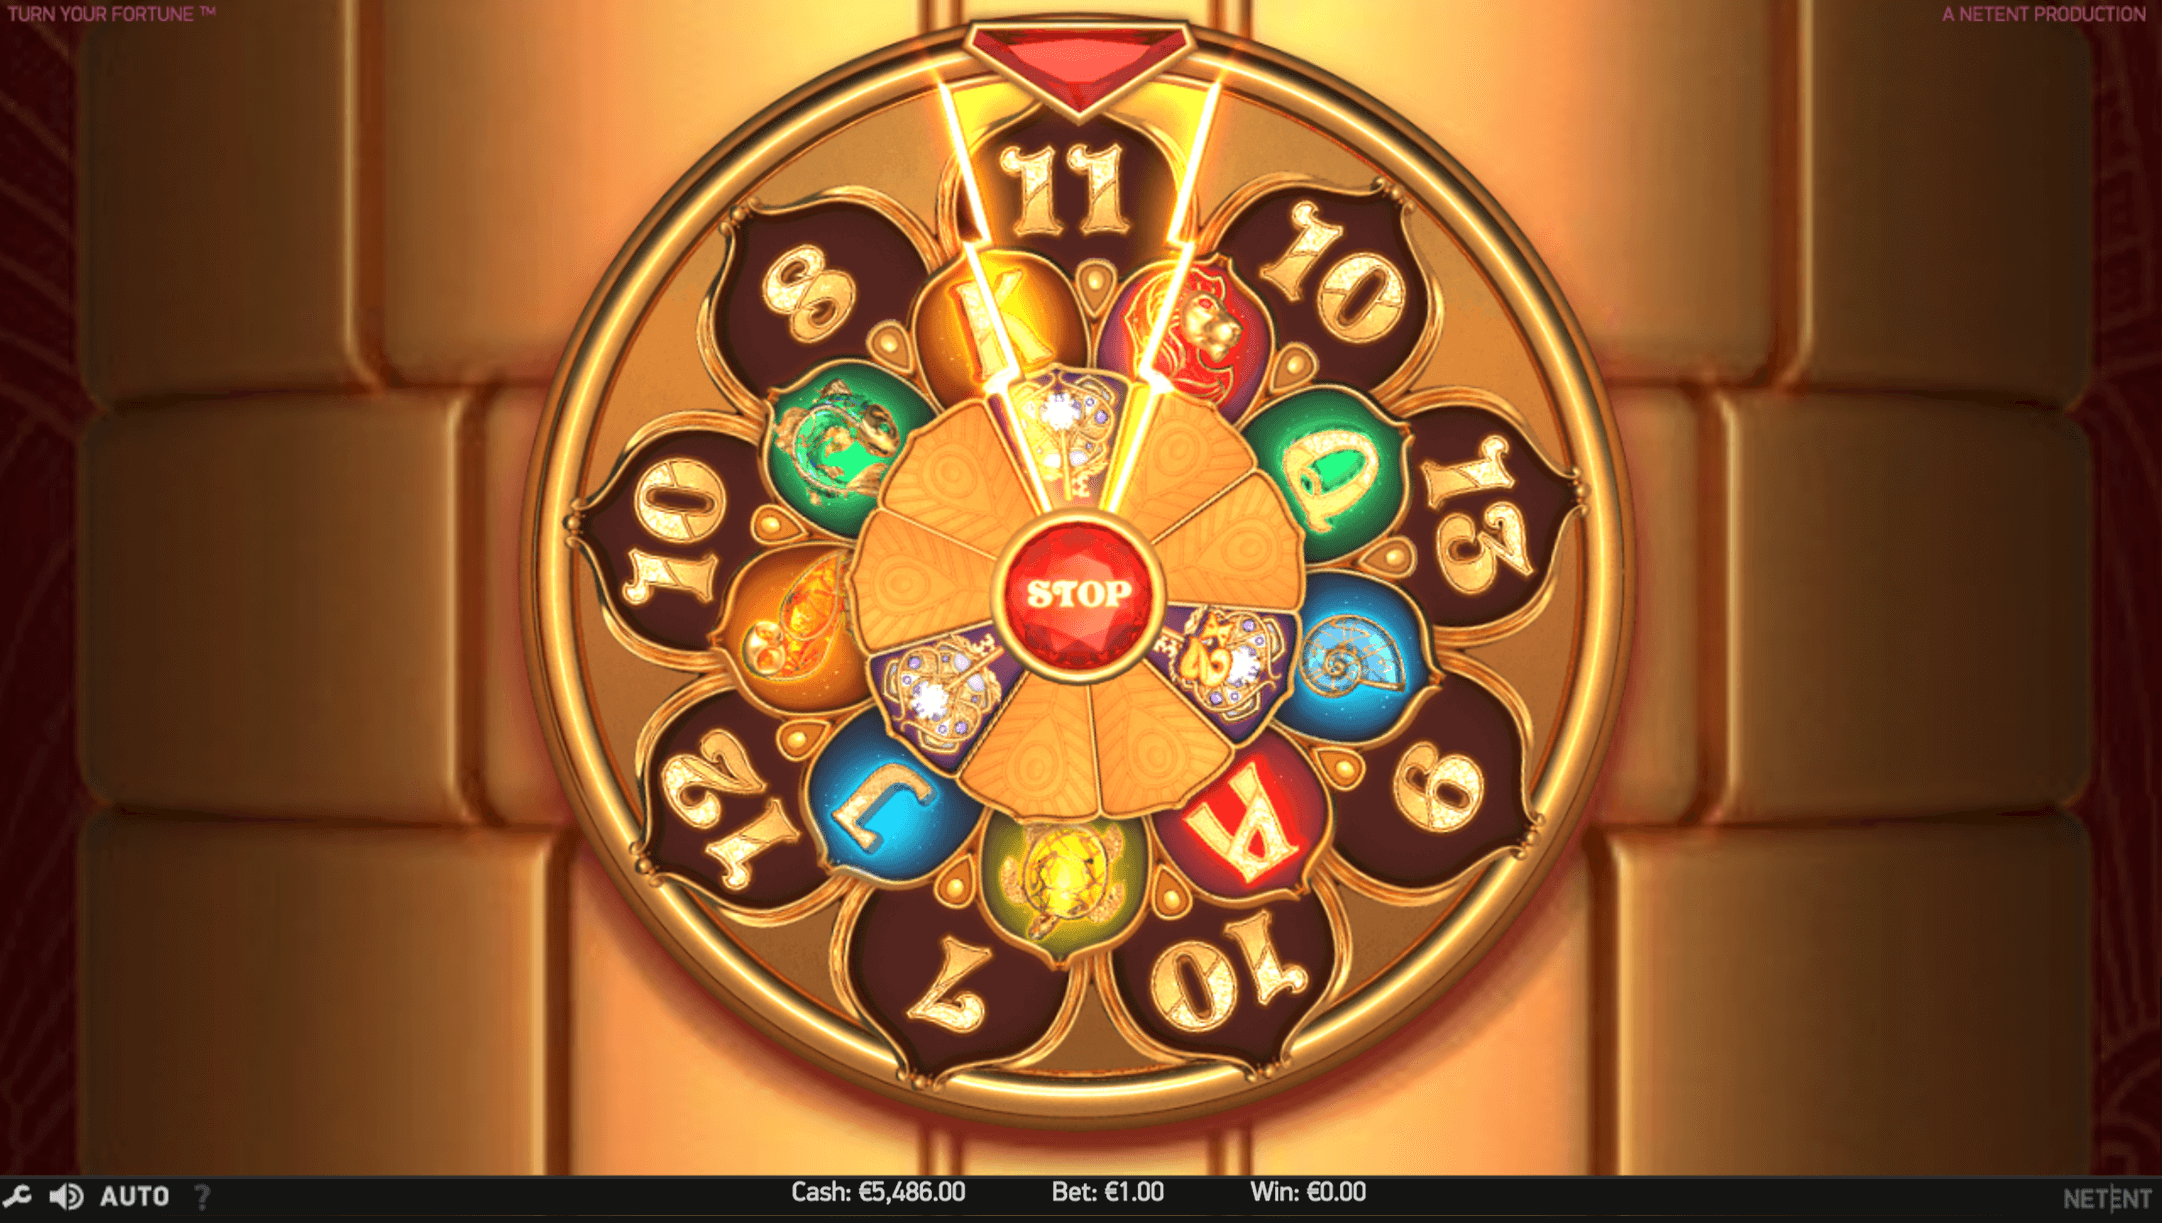 turn-your-fortune-wheel